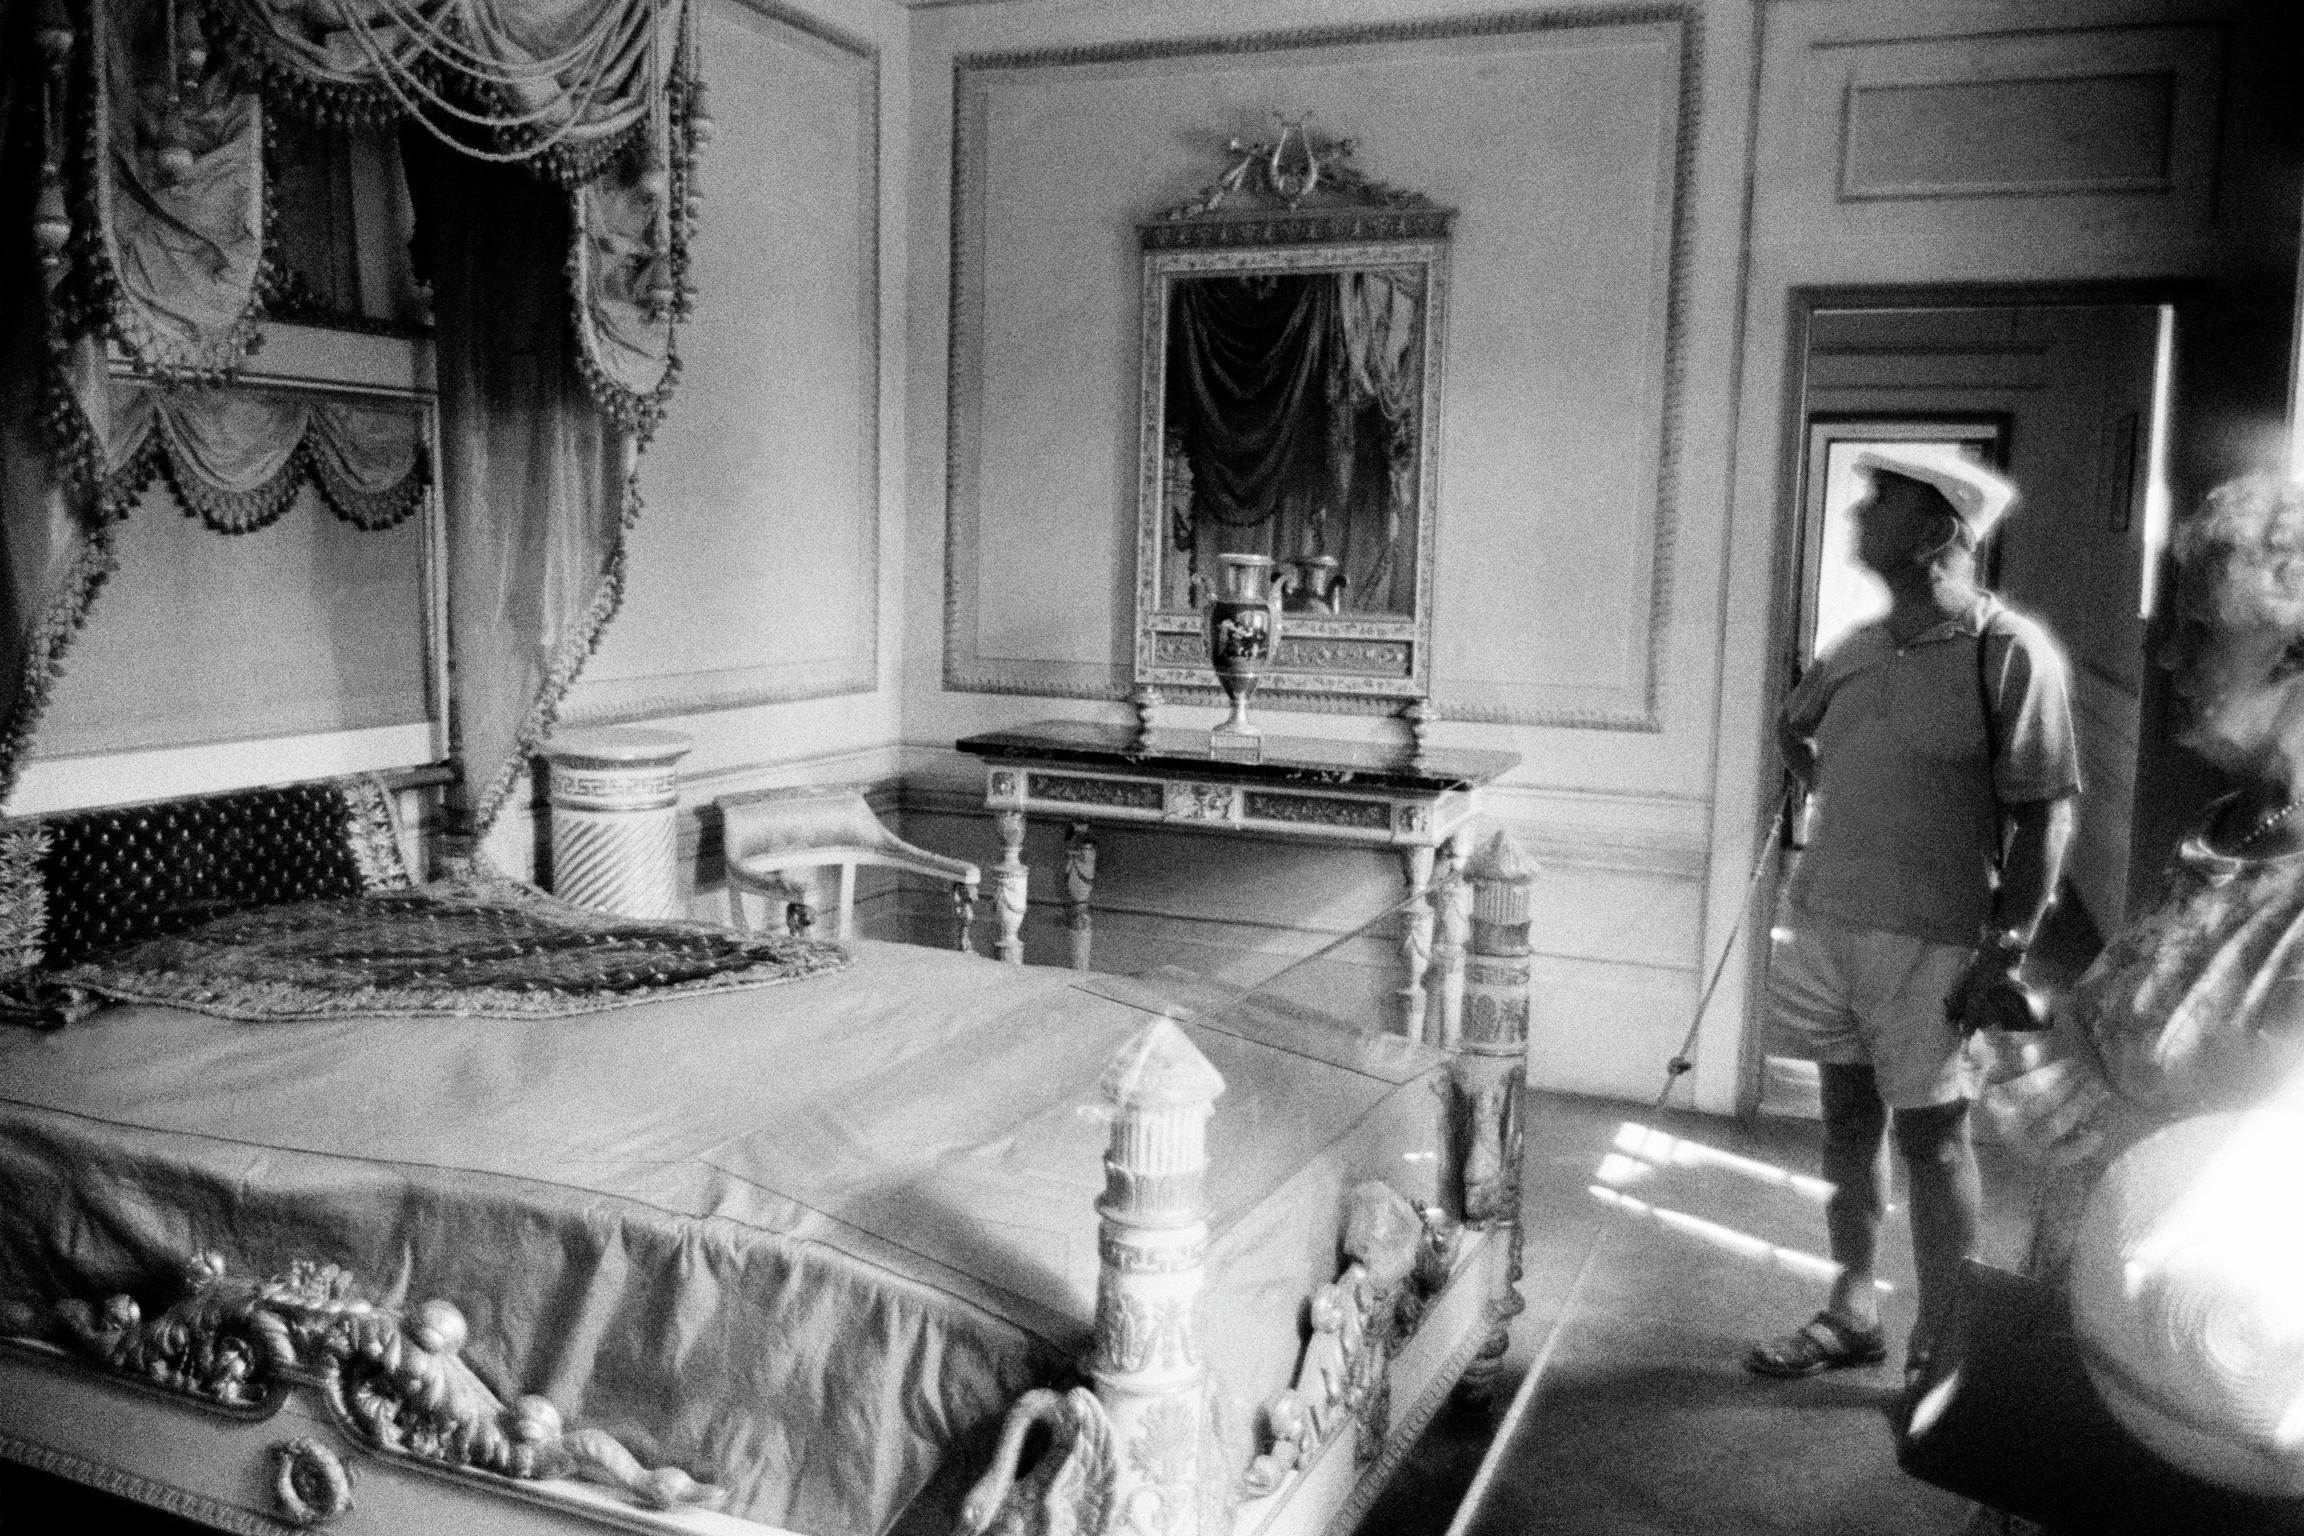 French emperor Napoleon I was exiled to Elba after his forced abdication in 1814. His bedroom. Elba. Italy